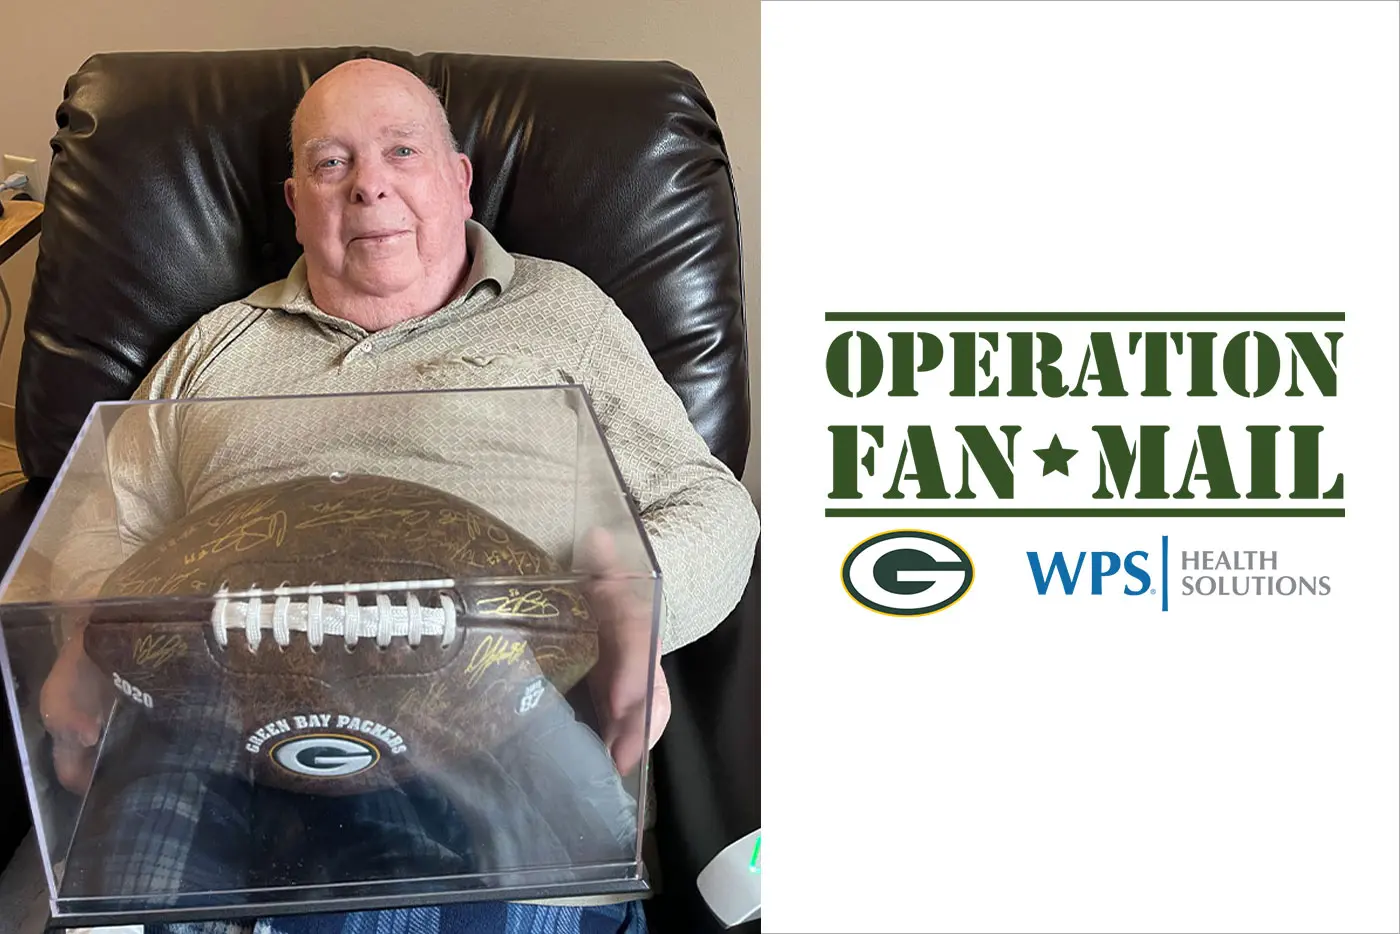 Army veteran Bob Washkuhn saluted for Operation Fan Mail